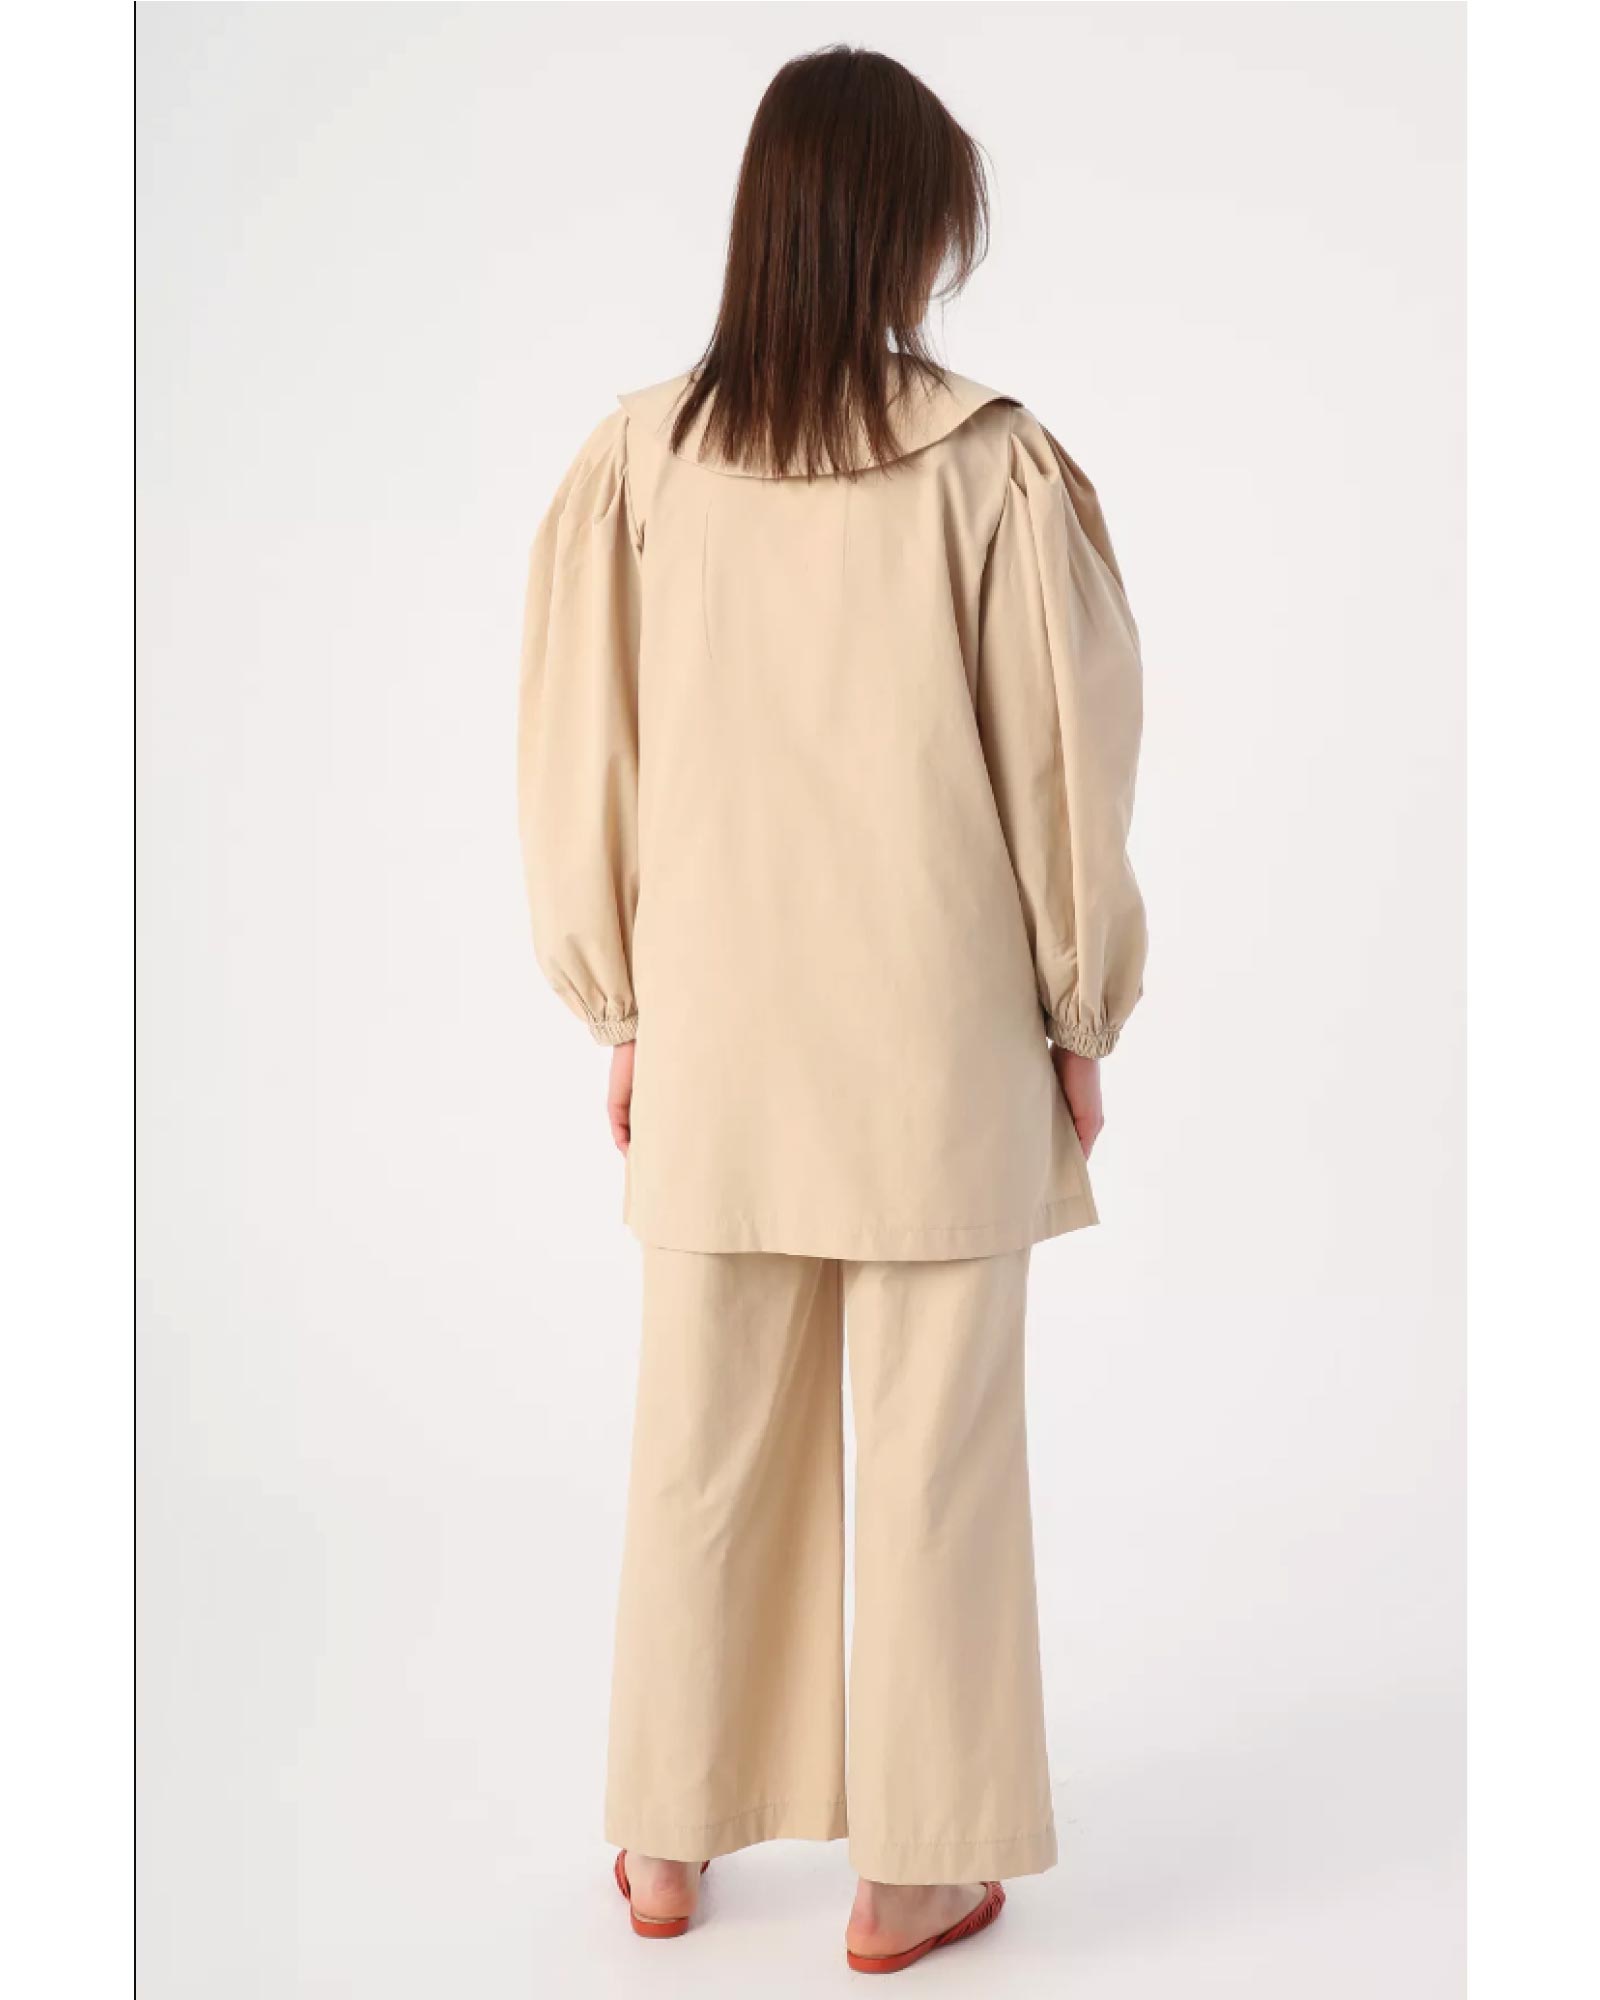 Hijab two-piece set consisting of a blouse with a large collar and gold-colored buttons and trousers